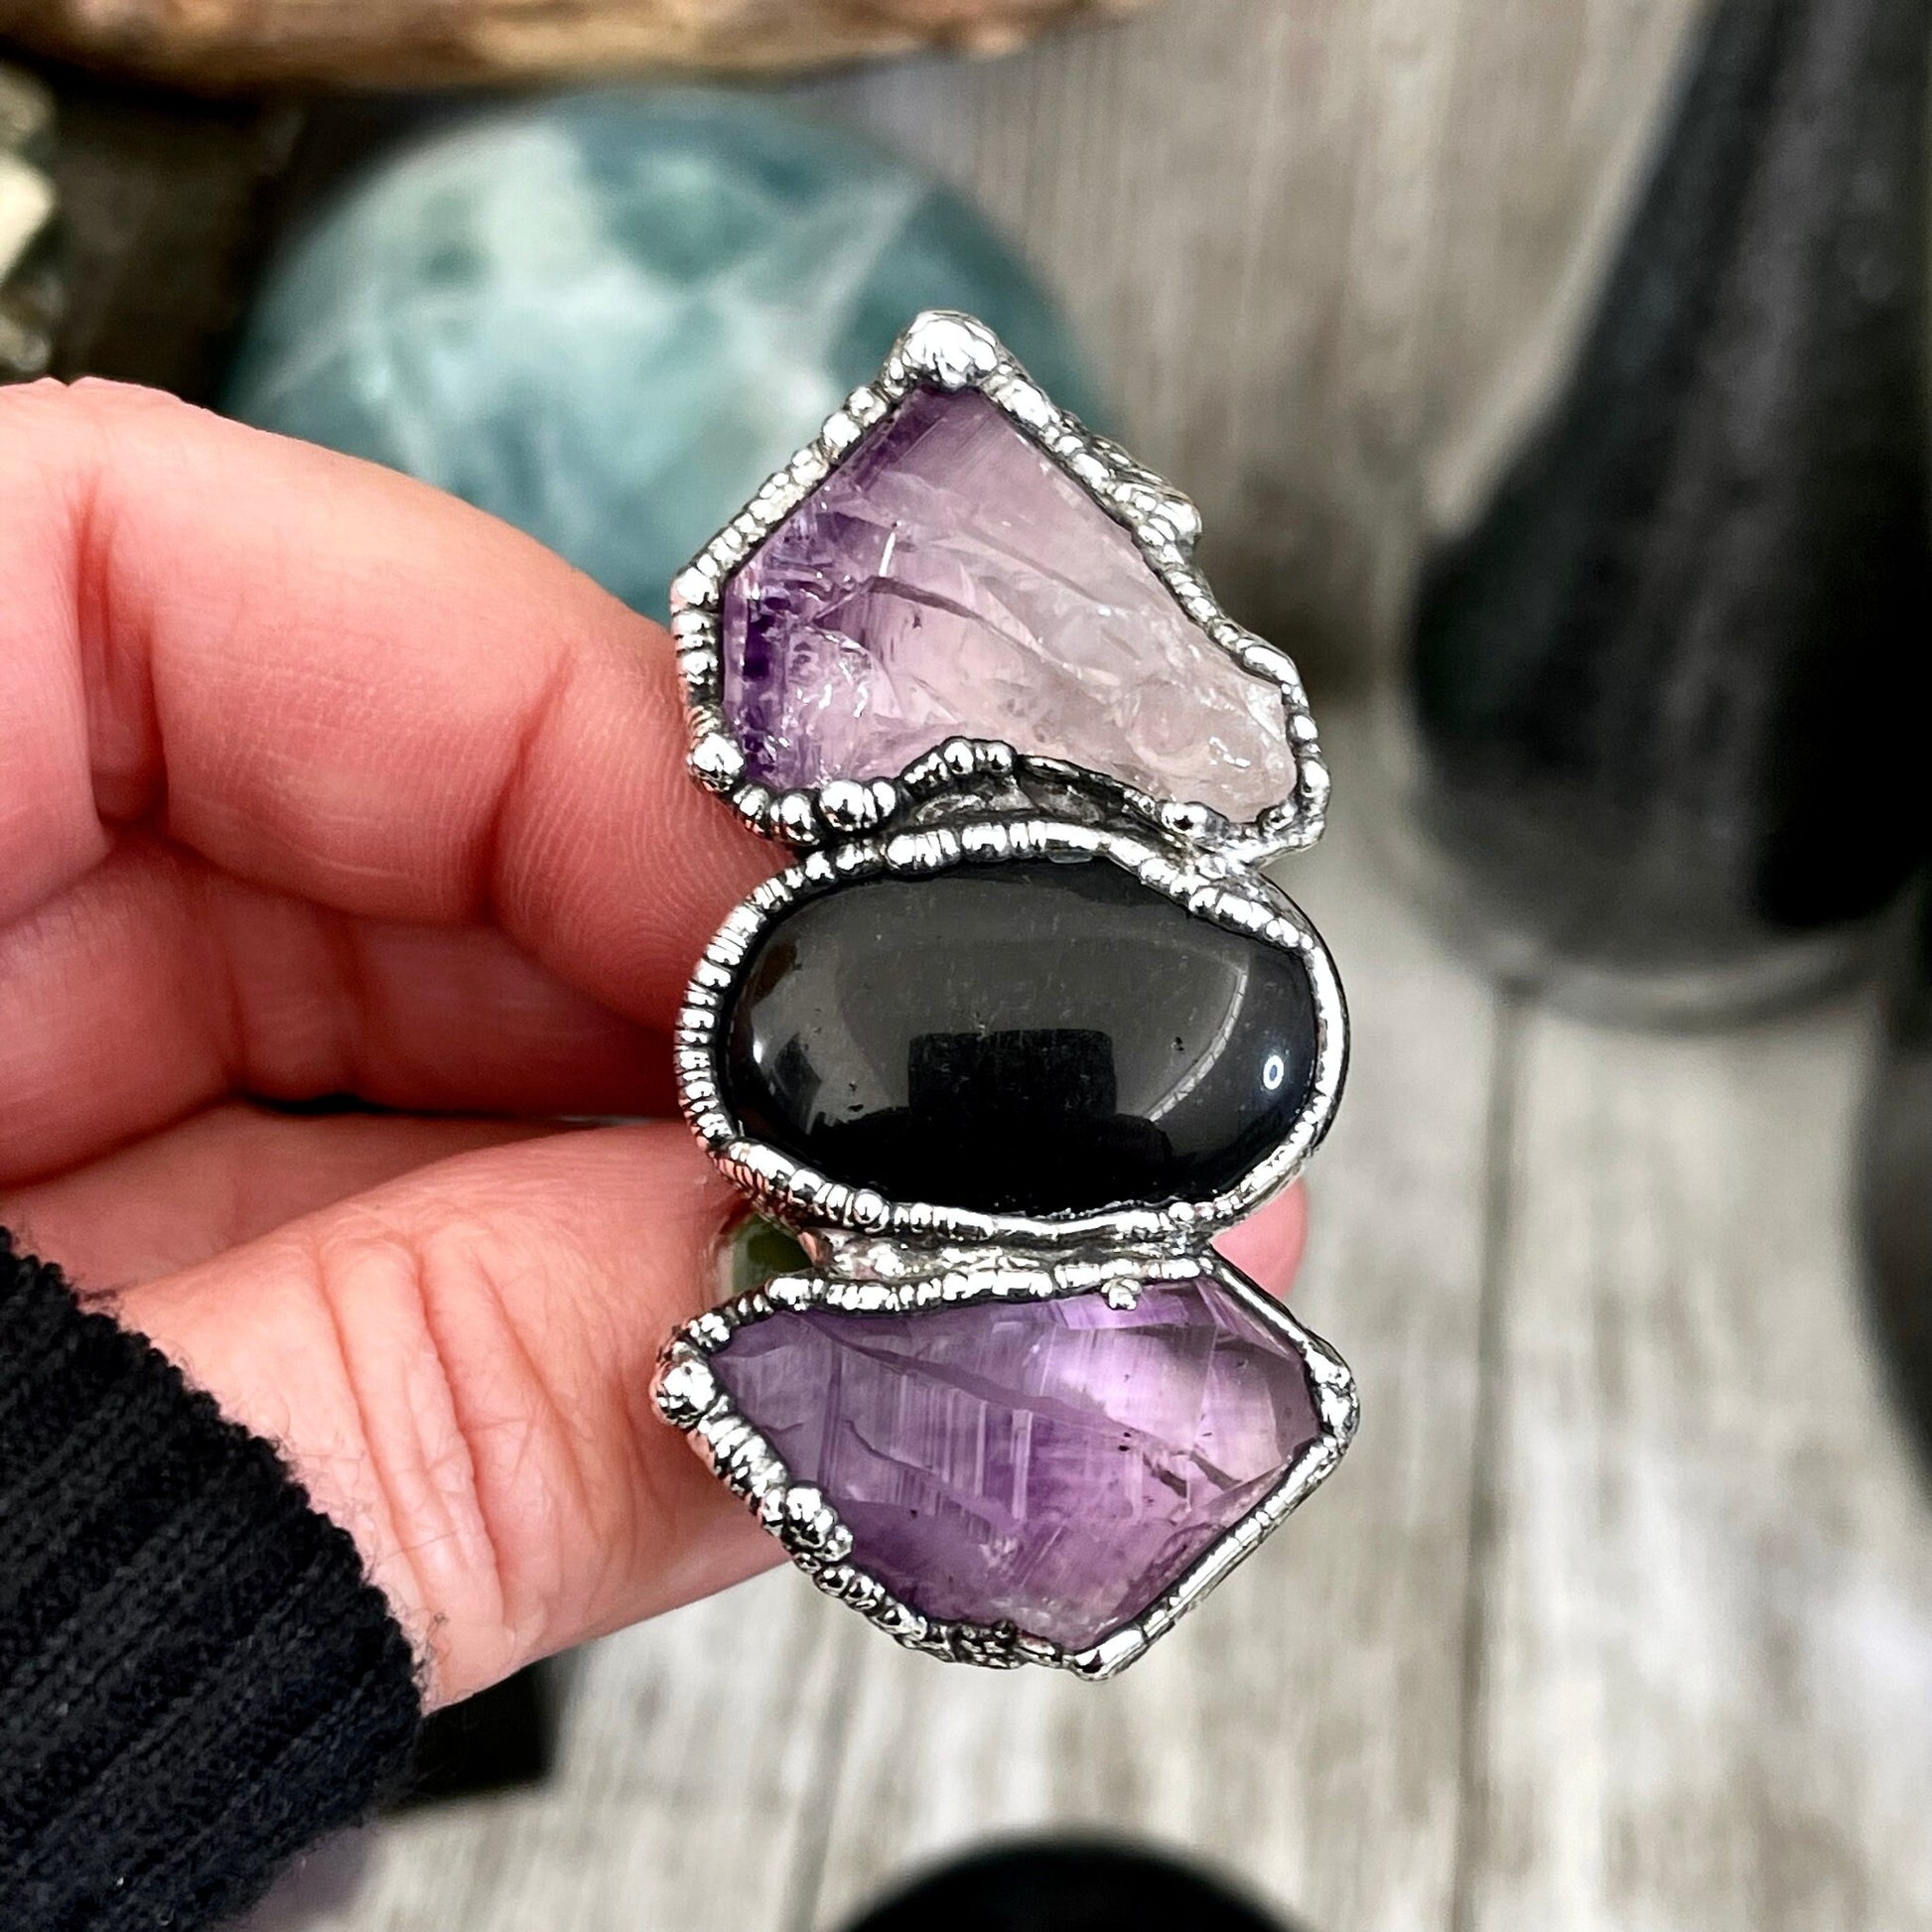 Size 9.5 Three Stone Ring- Amethyst Black Onyx Crystal Ring Fine Silver / Foxlark Collection - One of a Kind / Big Statement Jewelry